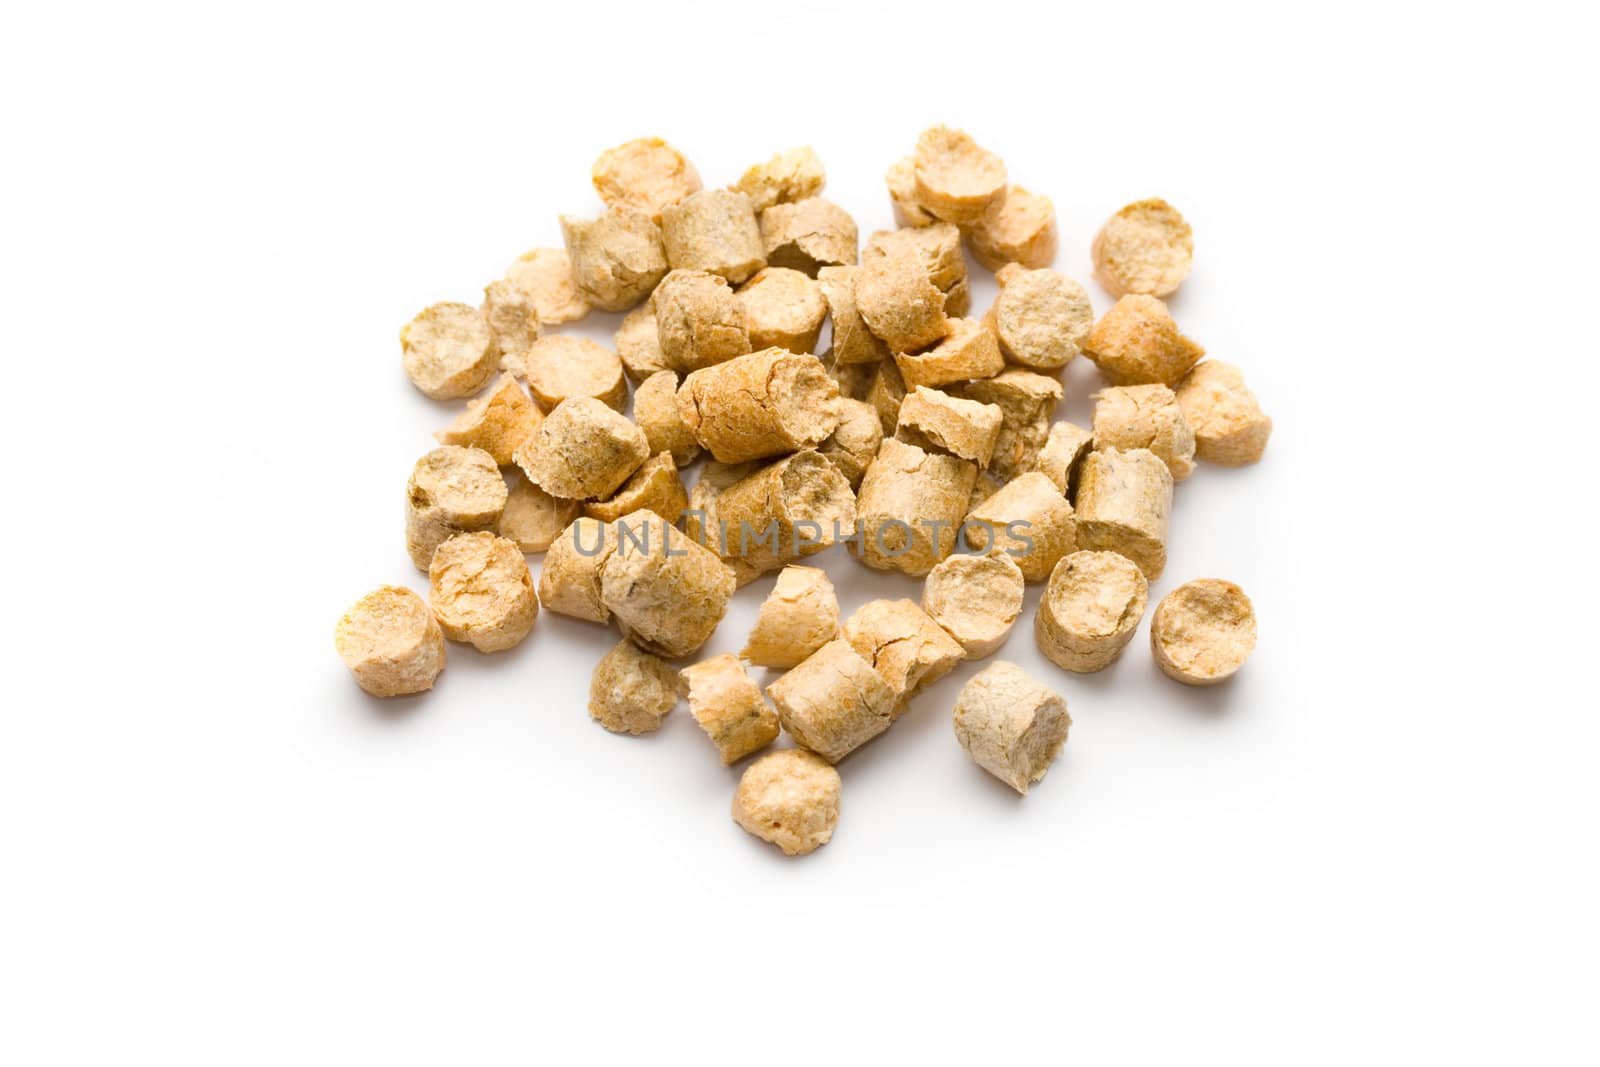 Wood Pellets isolated on white